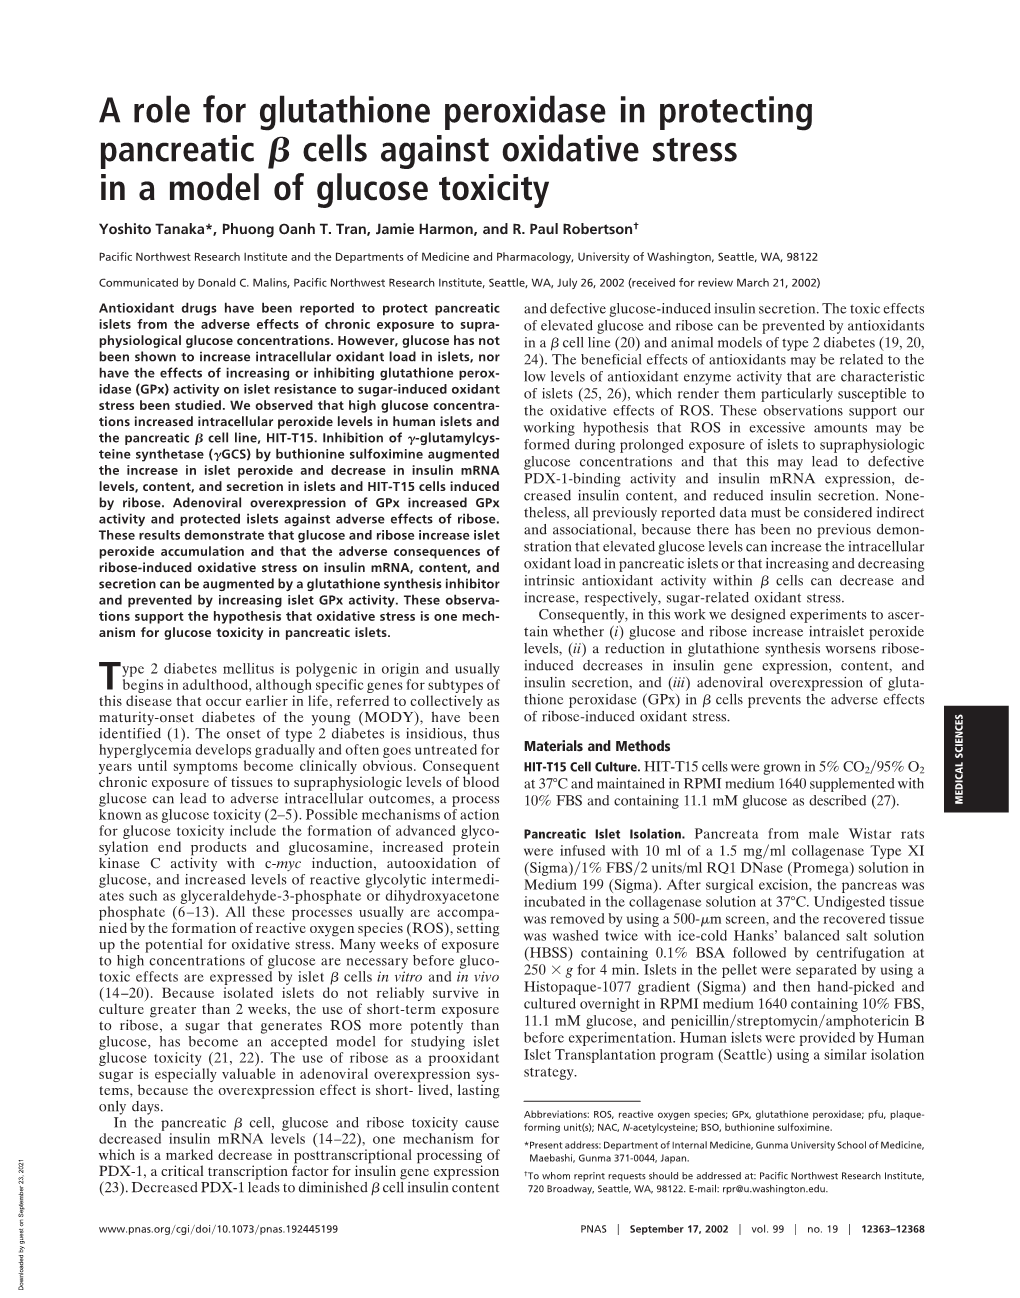 A Role for Glutathione Peroxidase in Protecting Pancreatic Cells Against Oxidative Stress in a Model of Glucose Toxicity